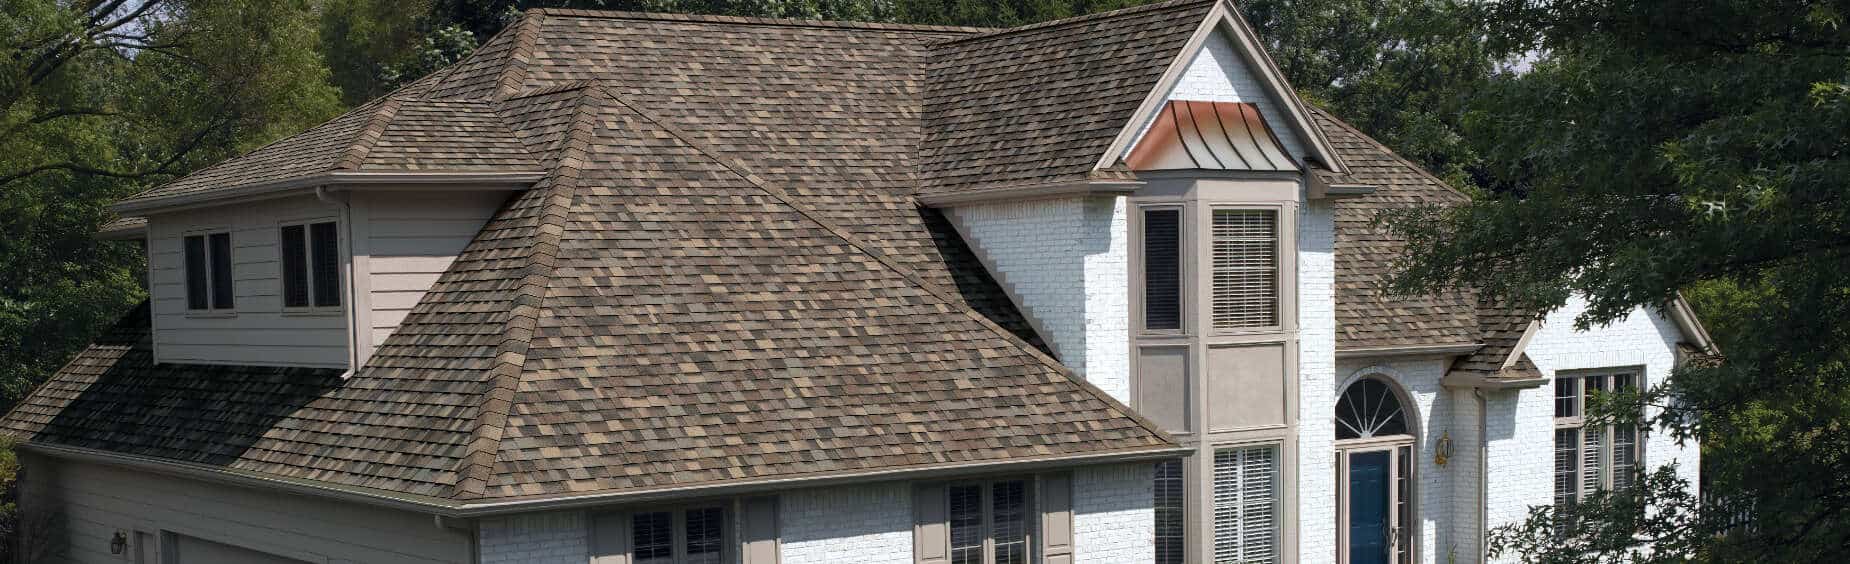 About Forte Roofing Best Roofing Company in Syracuse